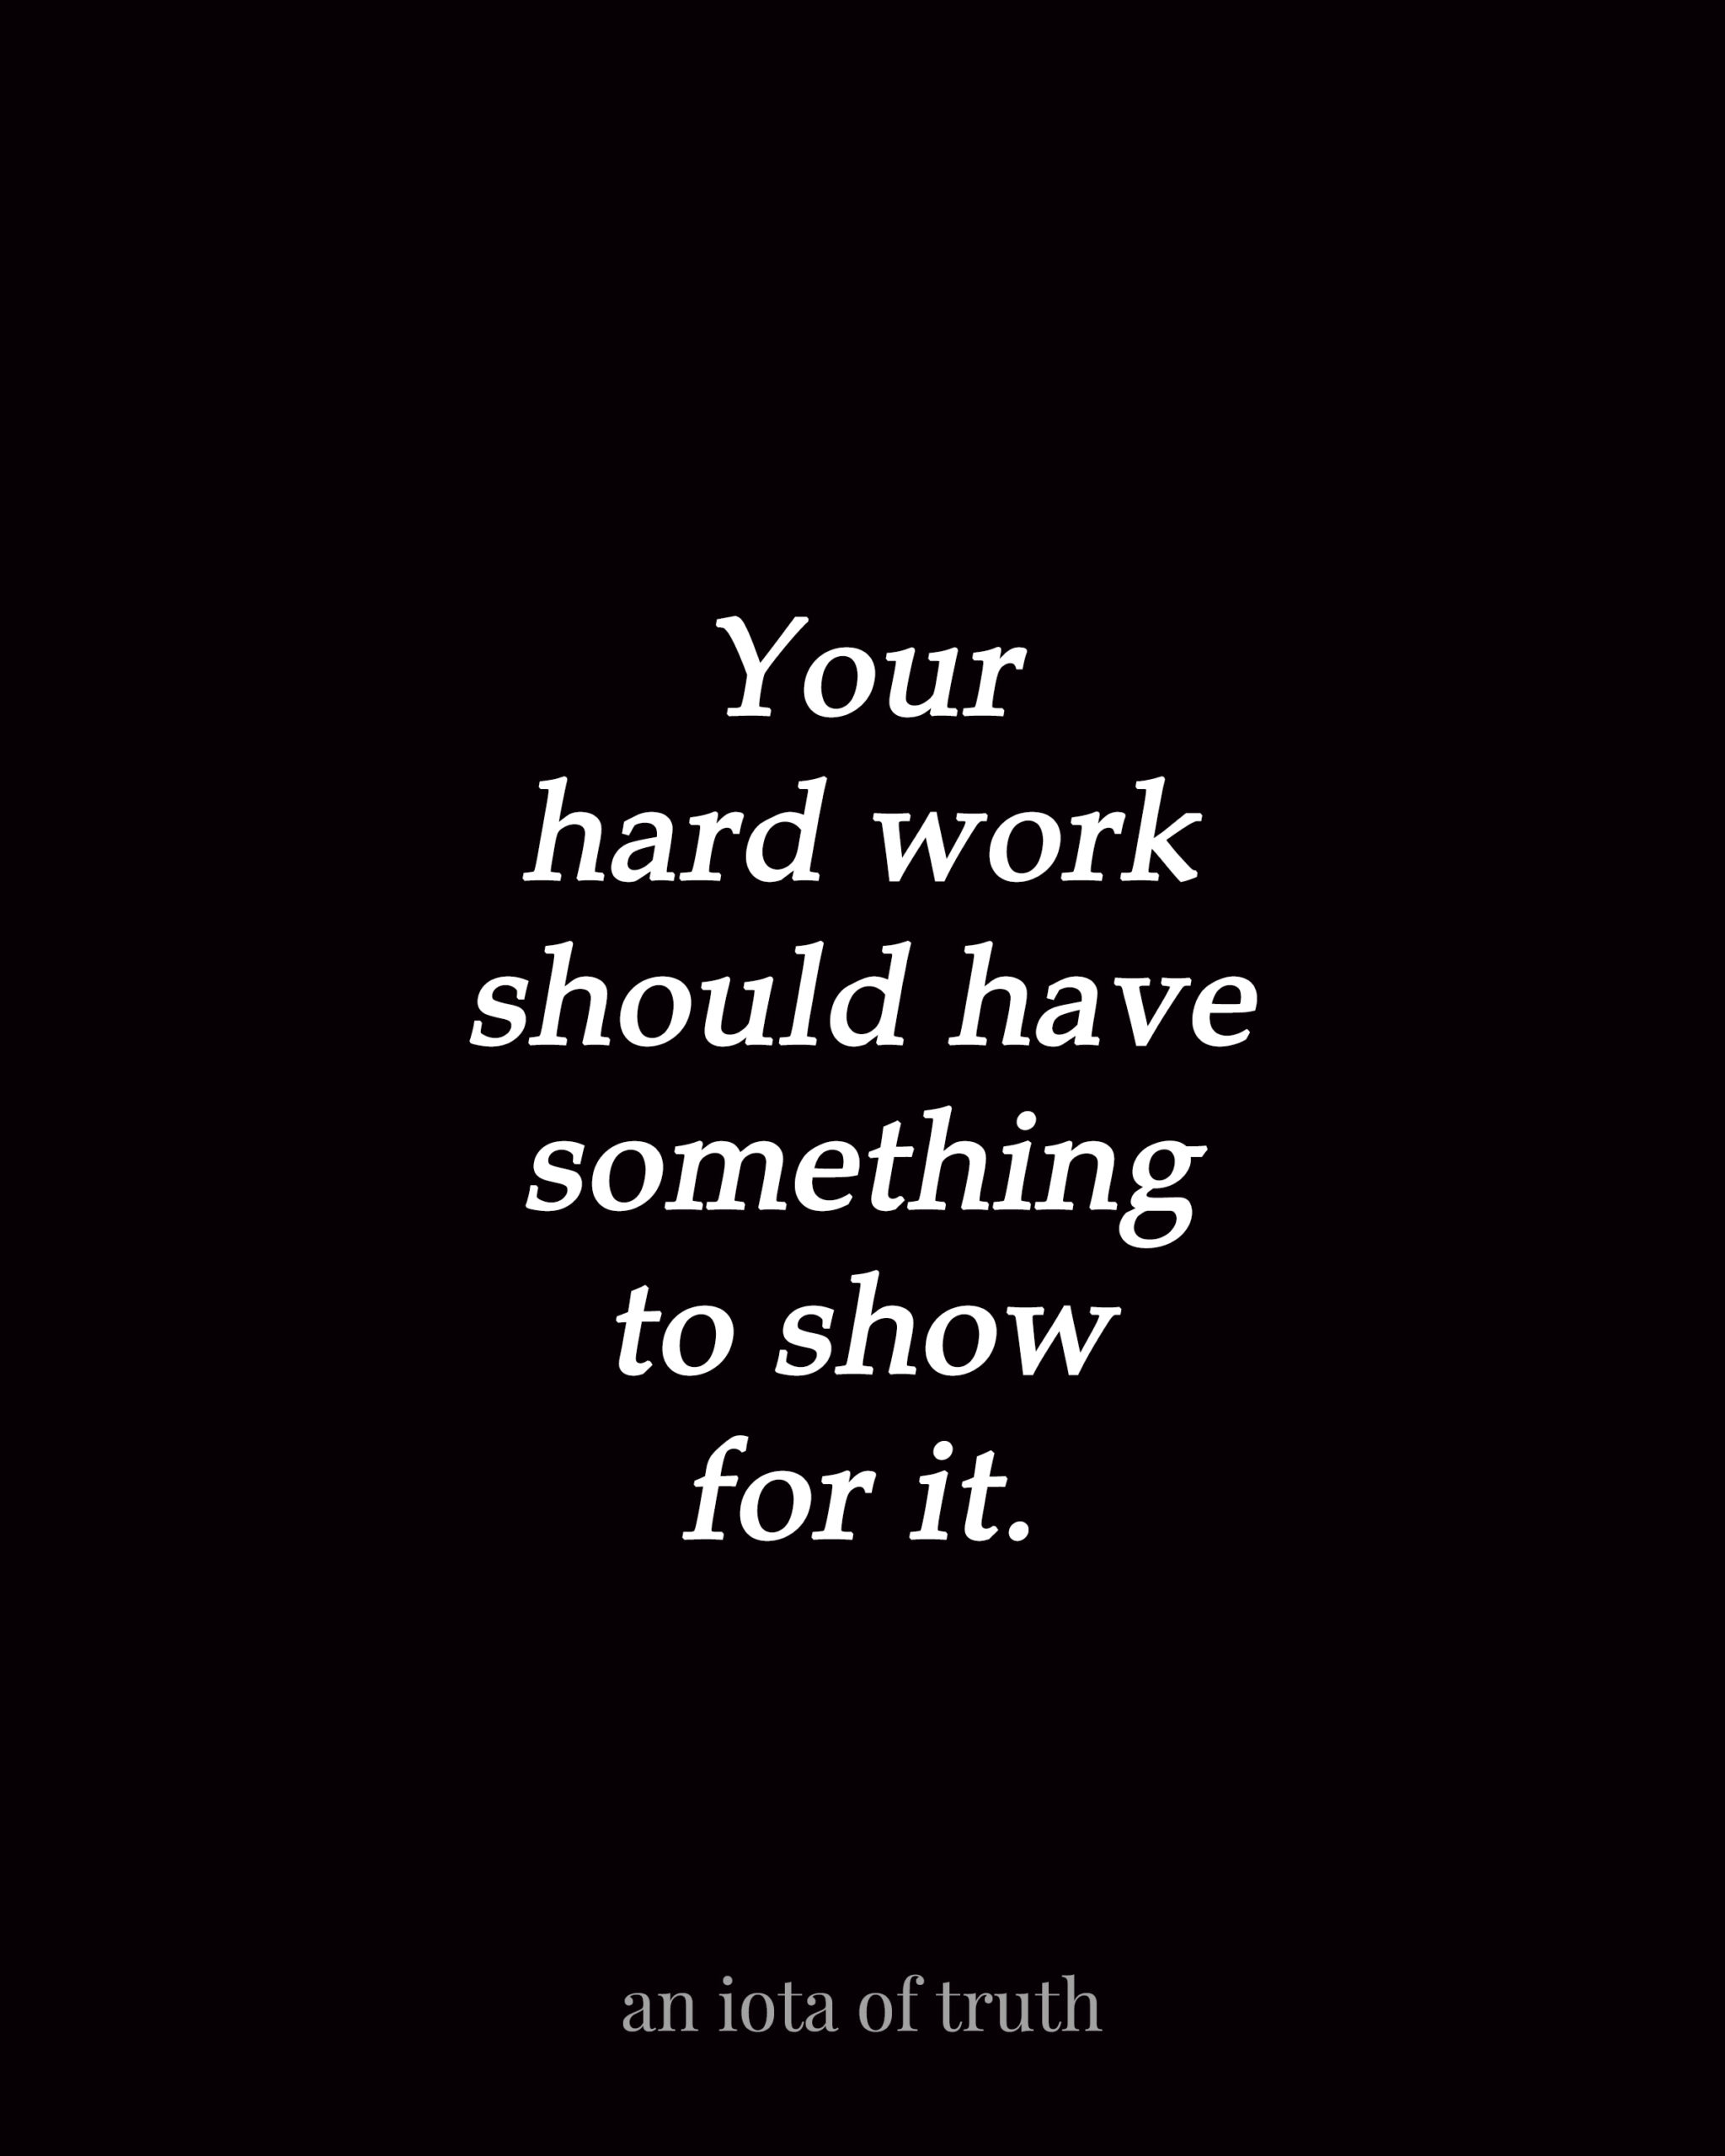 Your hard work should have something to show for it.